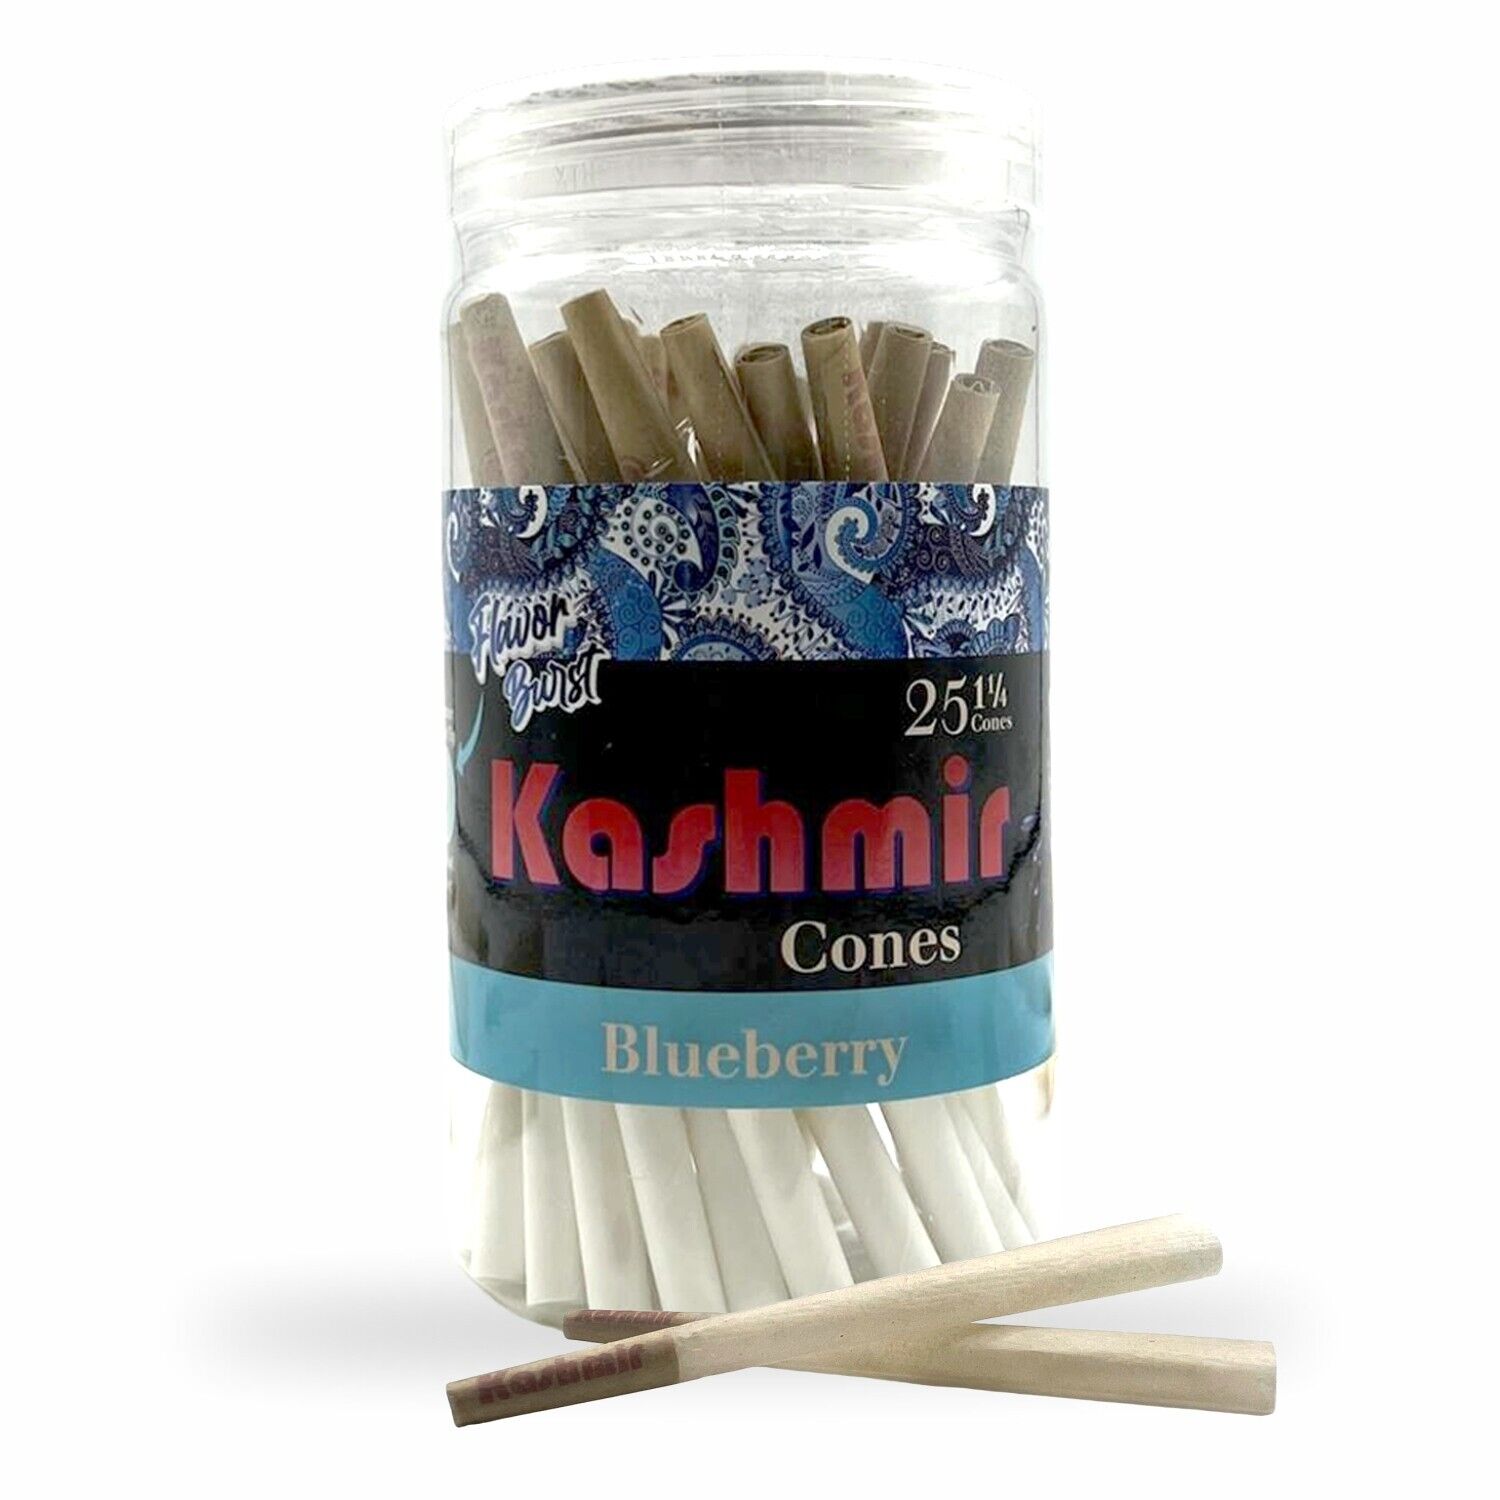 Kashmir Pre Rolled Cones Blueberry Flavored 1 1/4 Rolling Papers Cones 25 Ct Jar